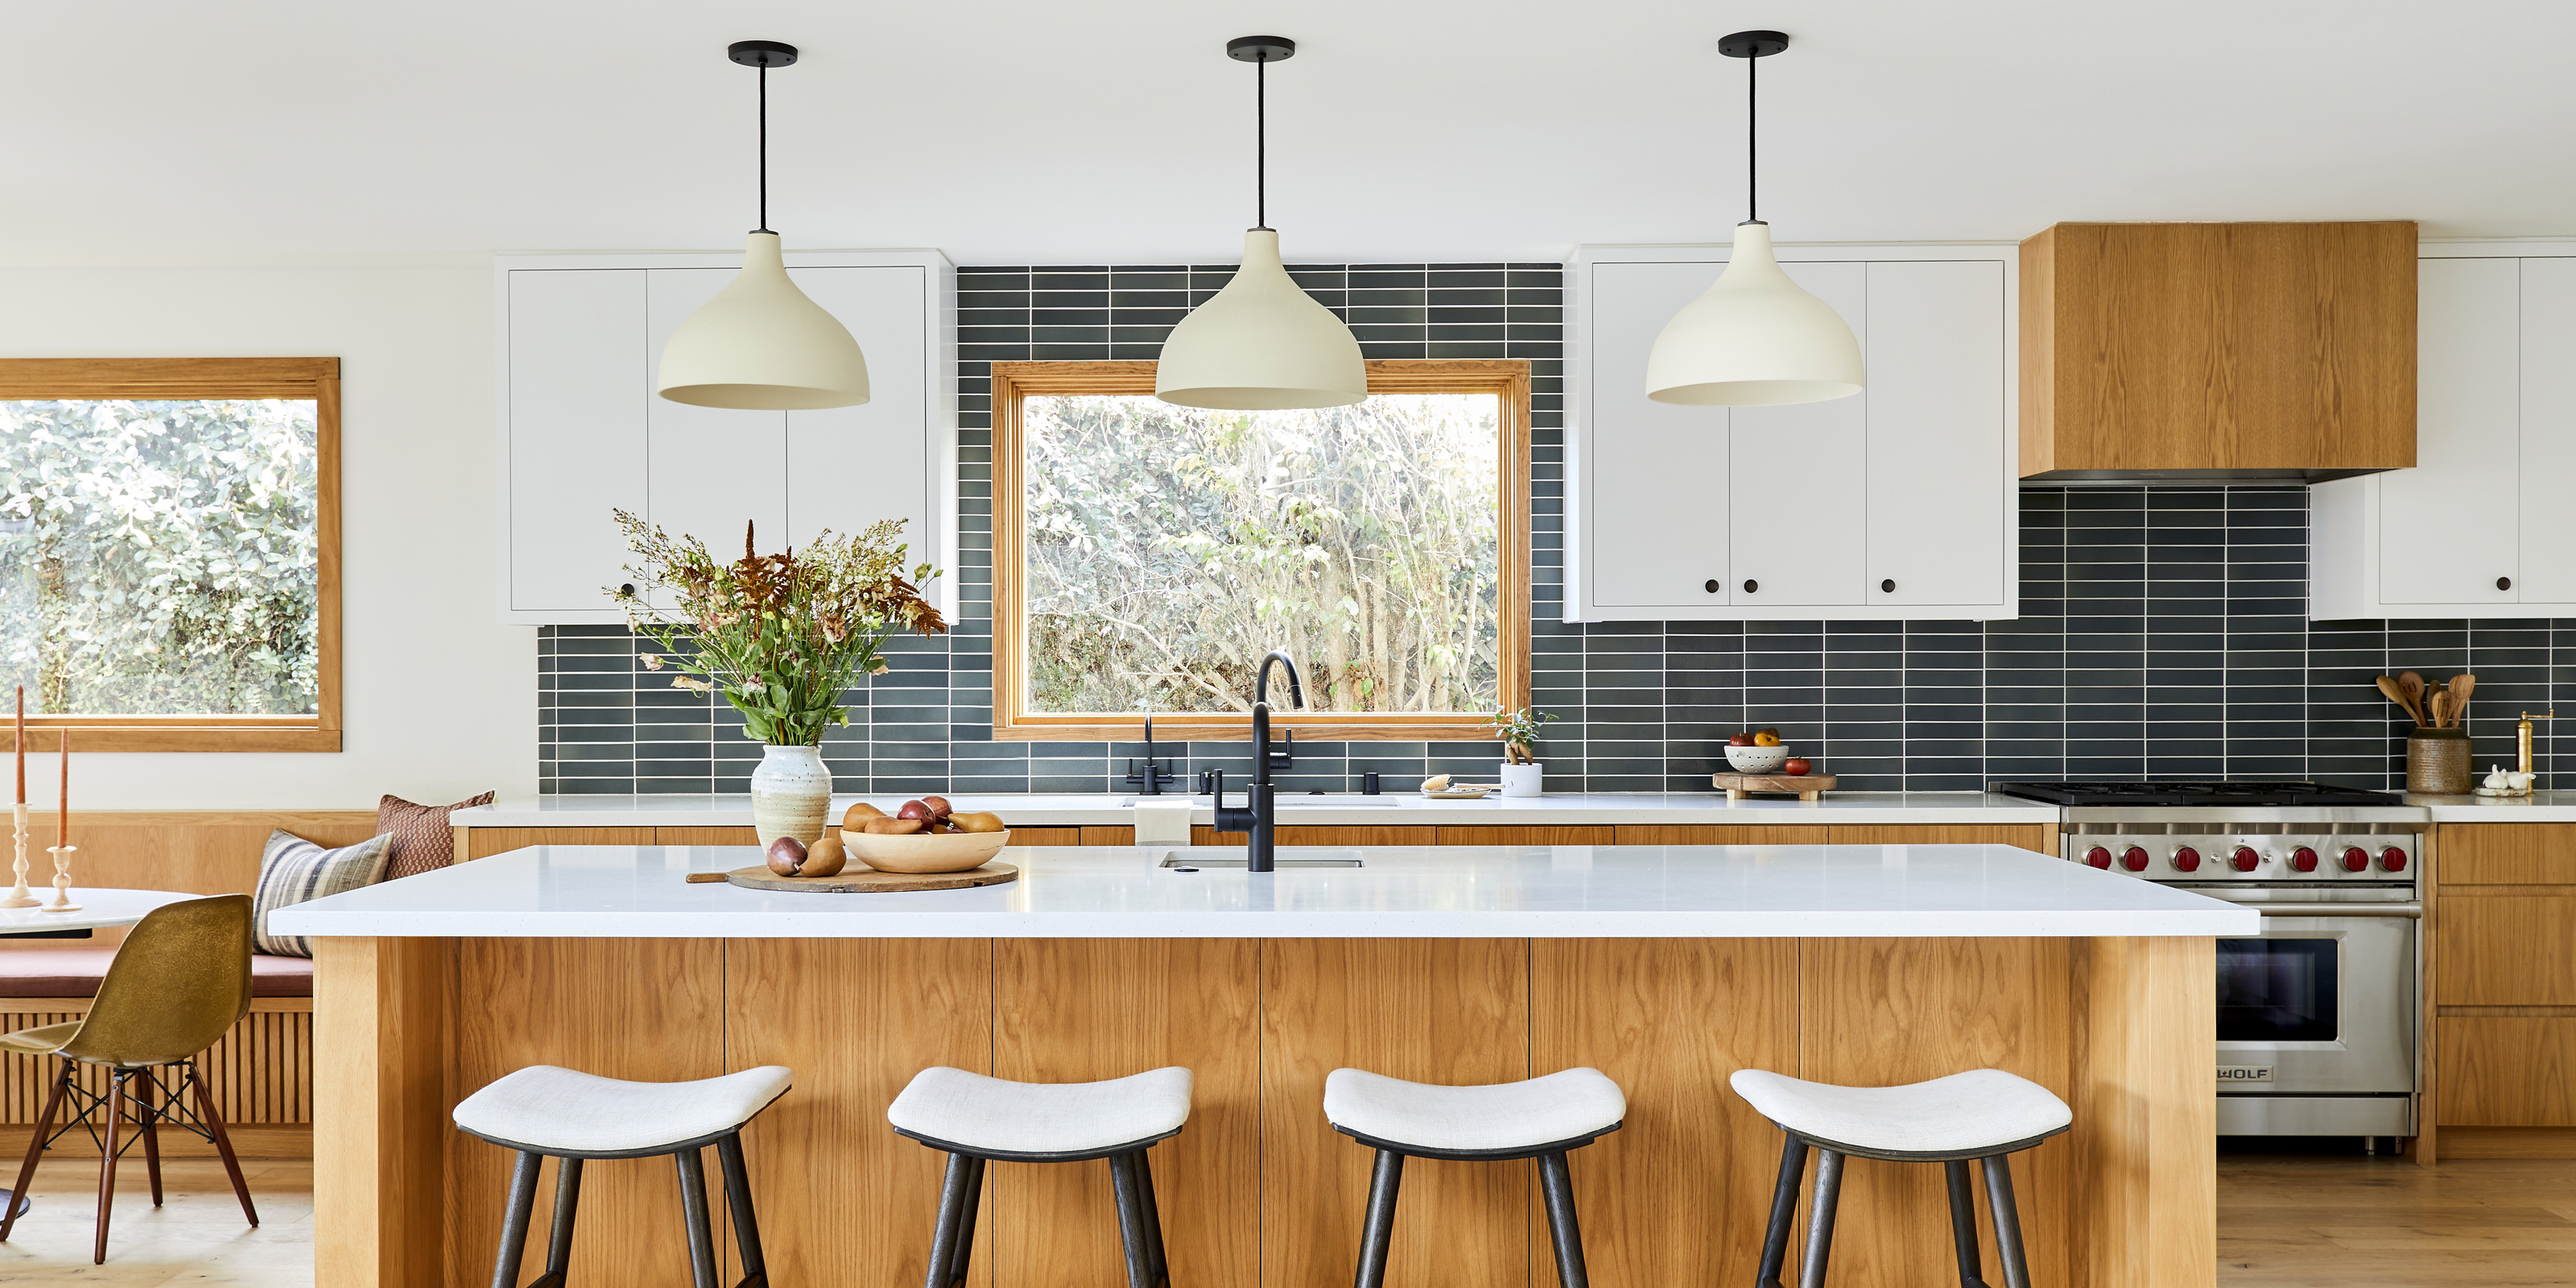 Current trends in kitchen and dining lighting